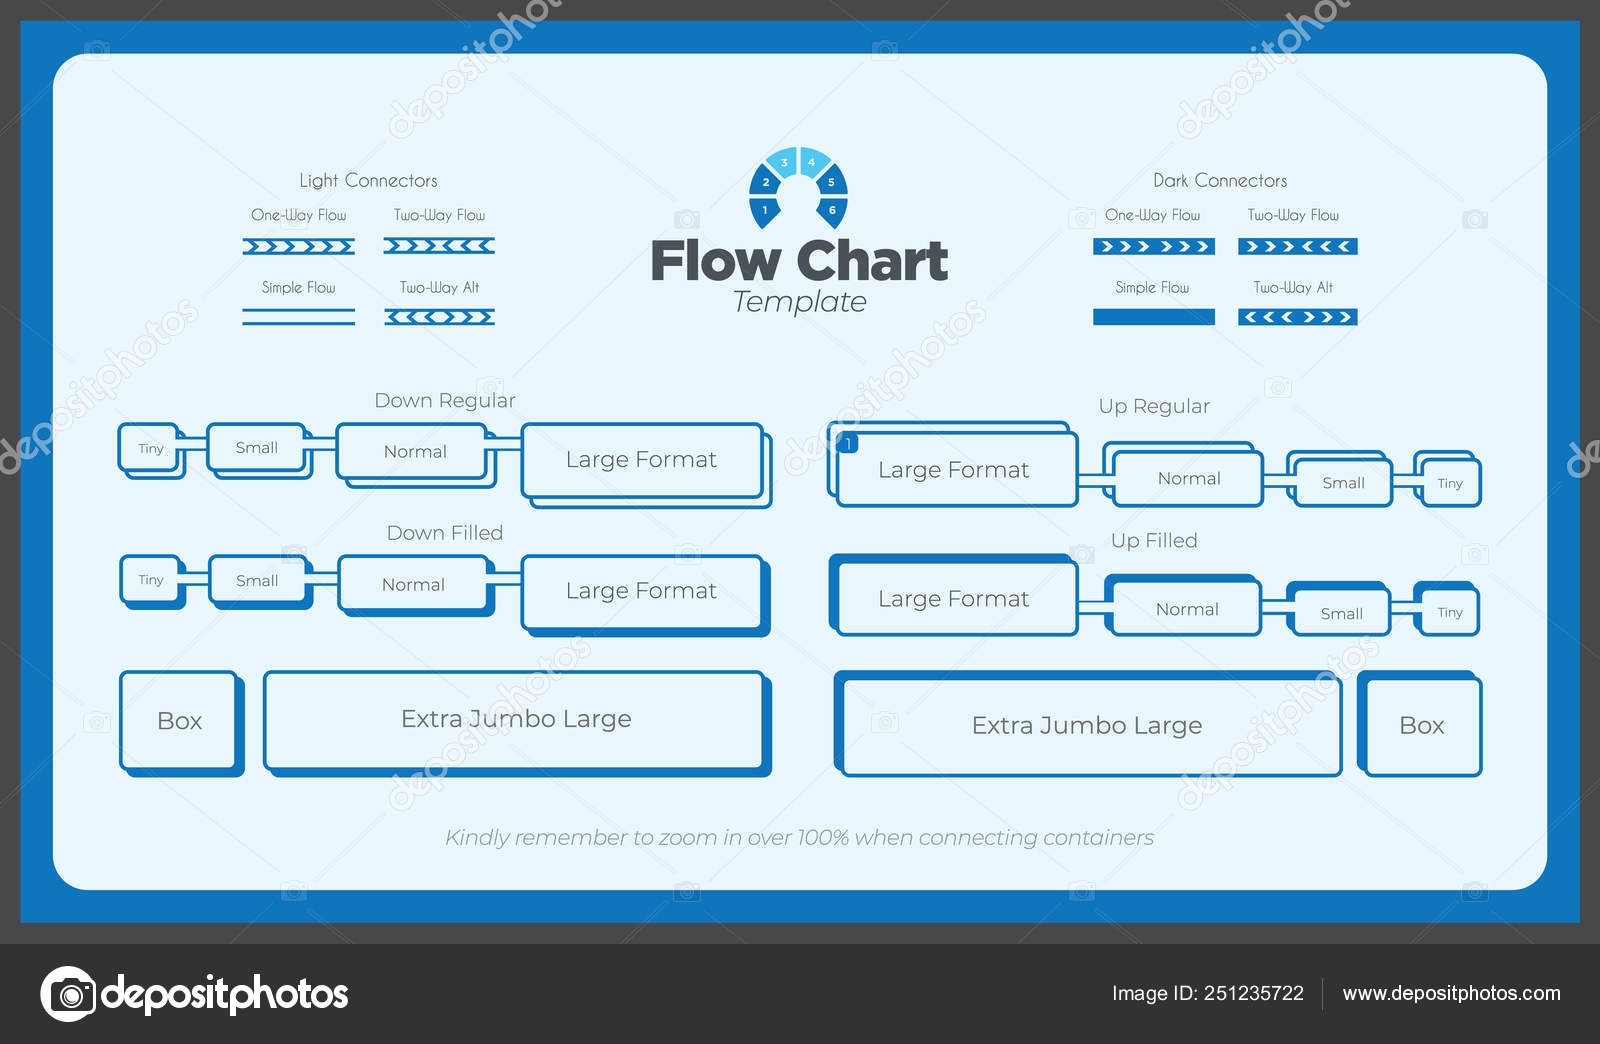 Build Your Own Flow Chart